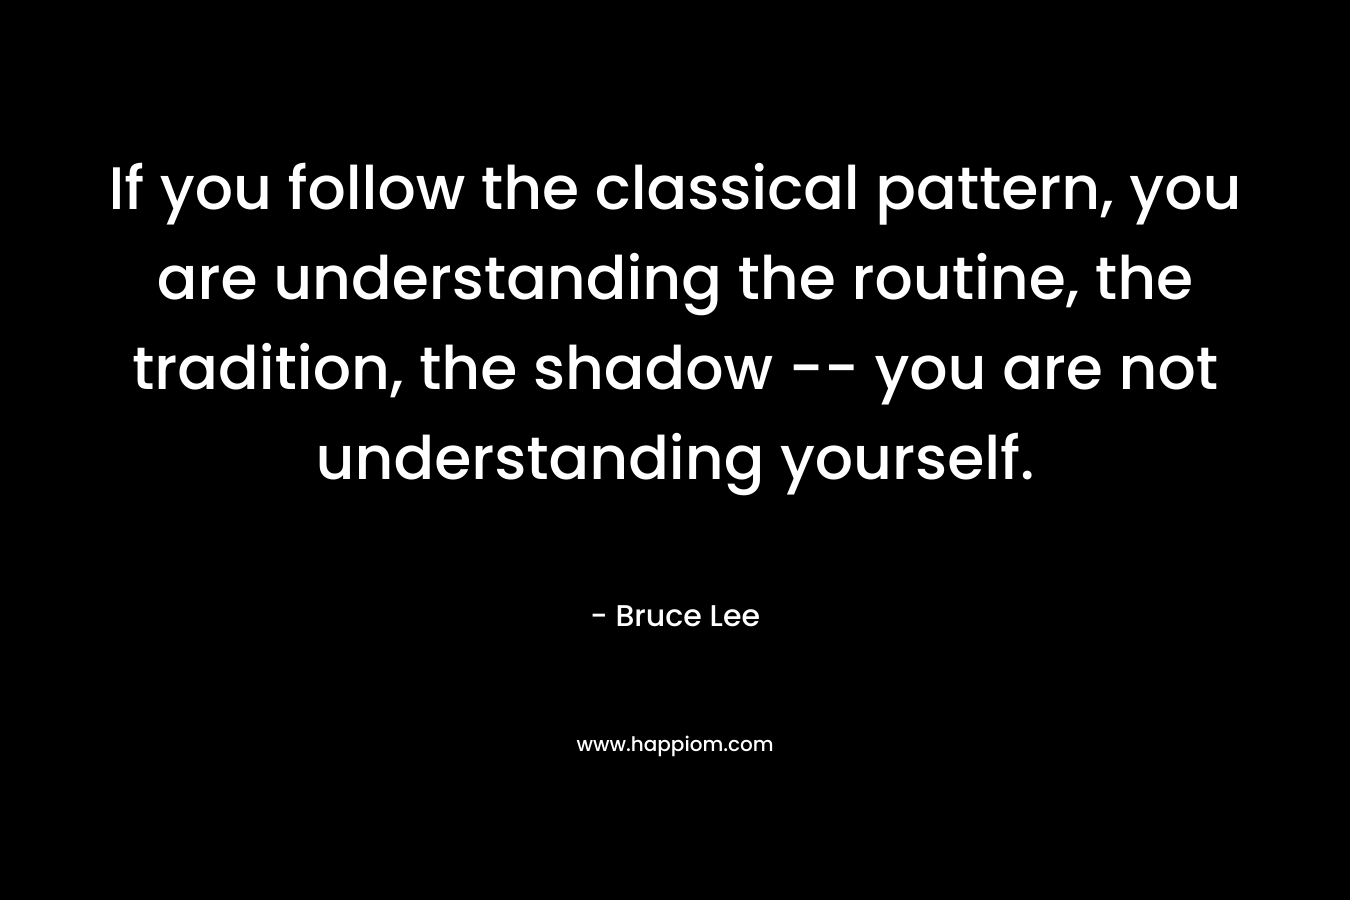 If you follow the classical pattern, you are understanding the routine, the tradition, the shadow -- you are not understanding yourself.